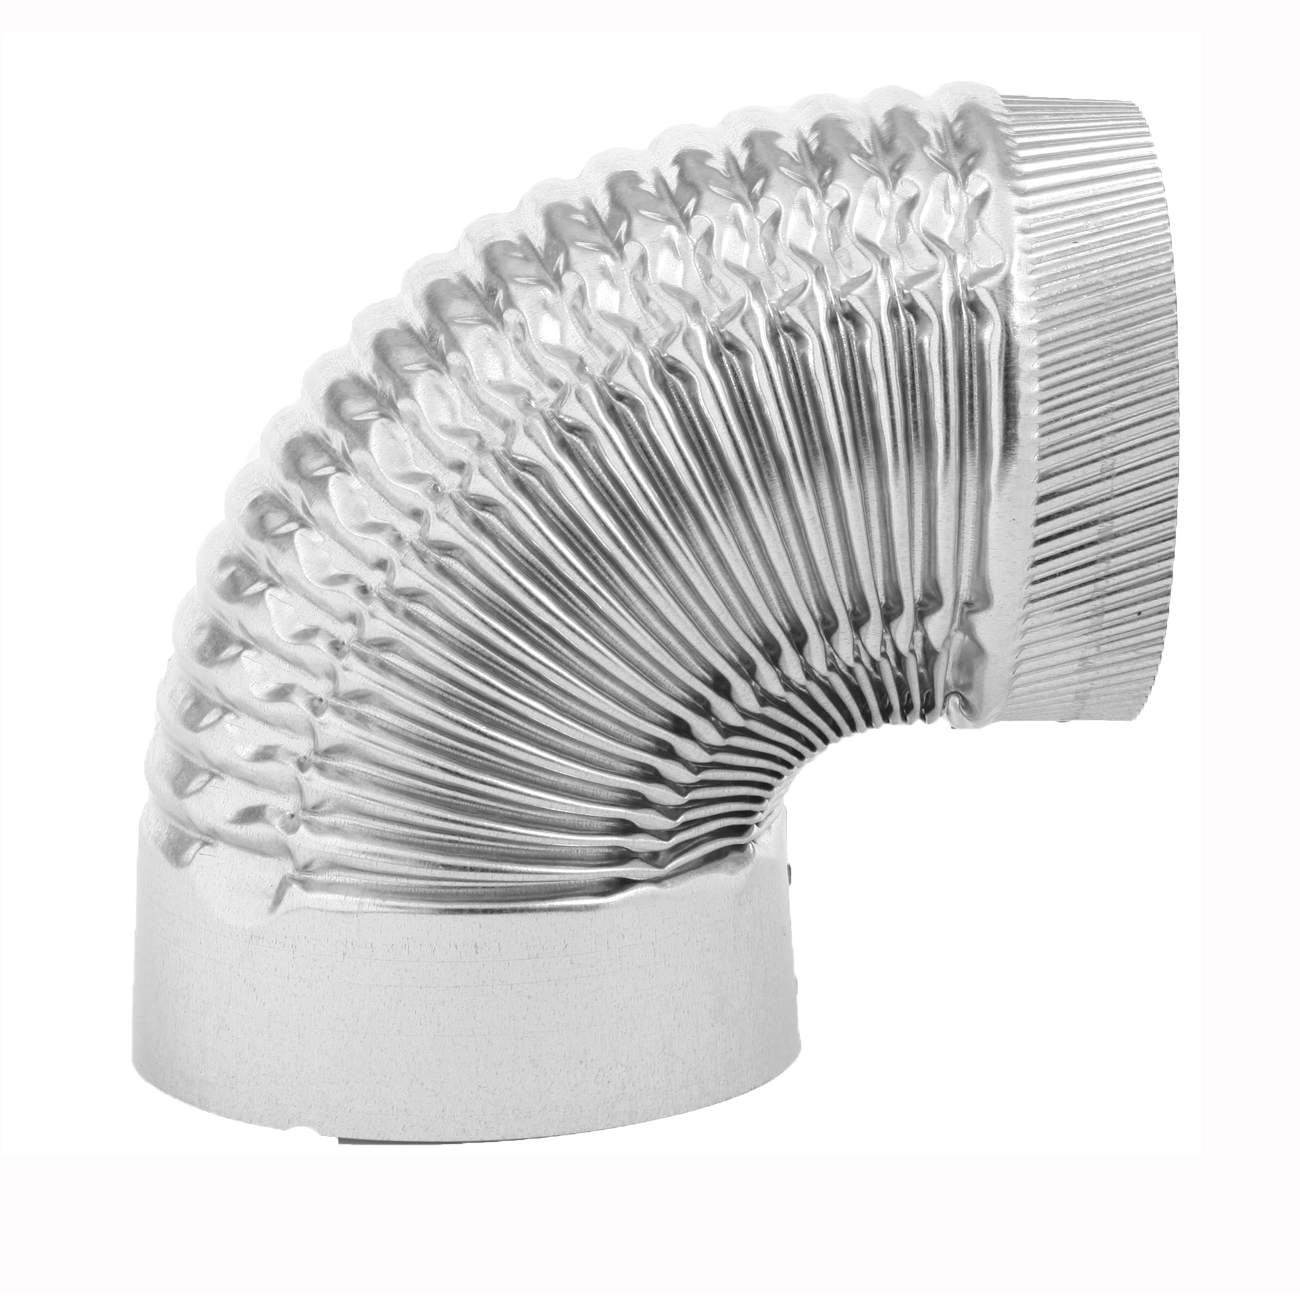 GV0326 Corrugated Elbow, 6 in Connection, 28 Gauge, Galvanized